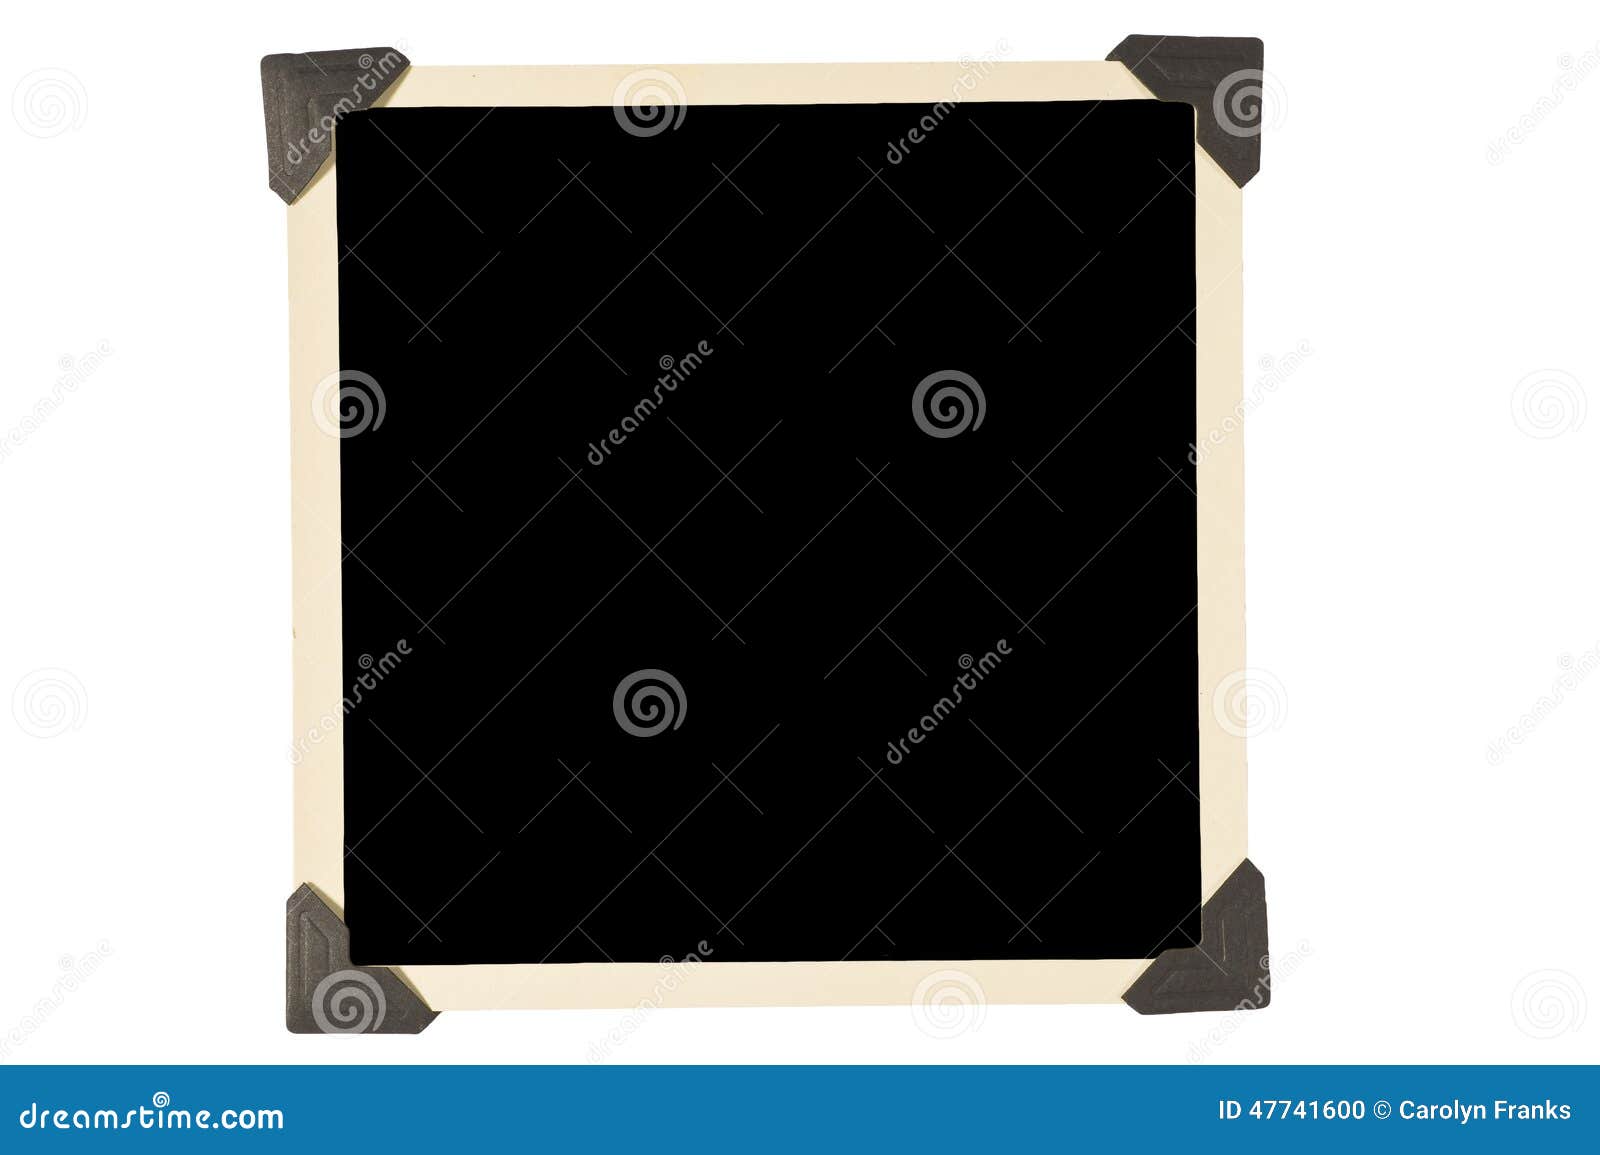 old square photo frame with black corners